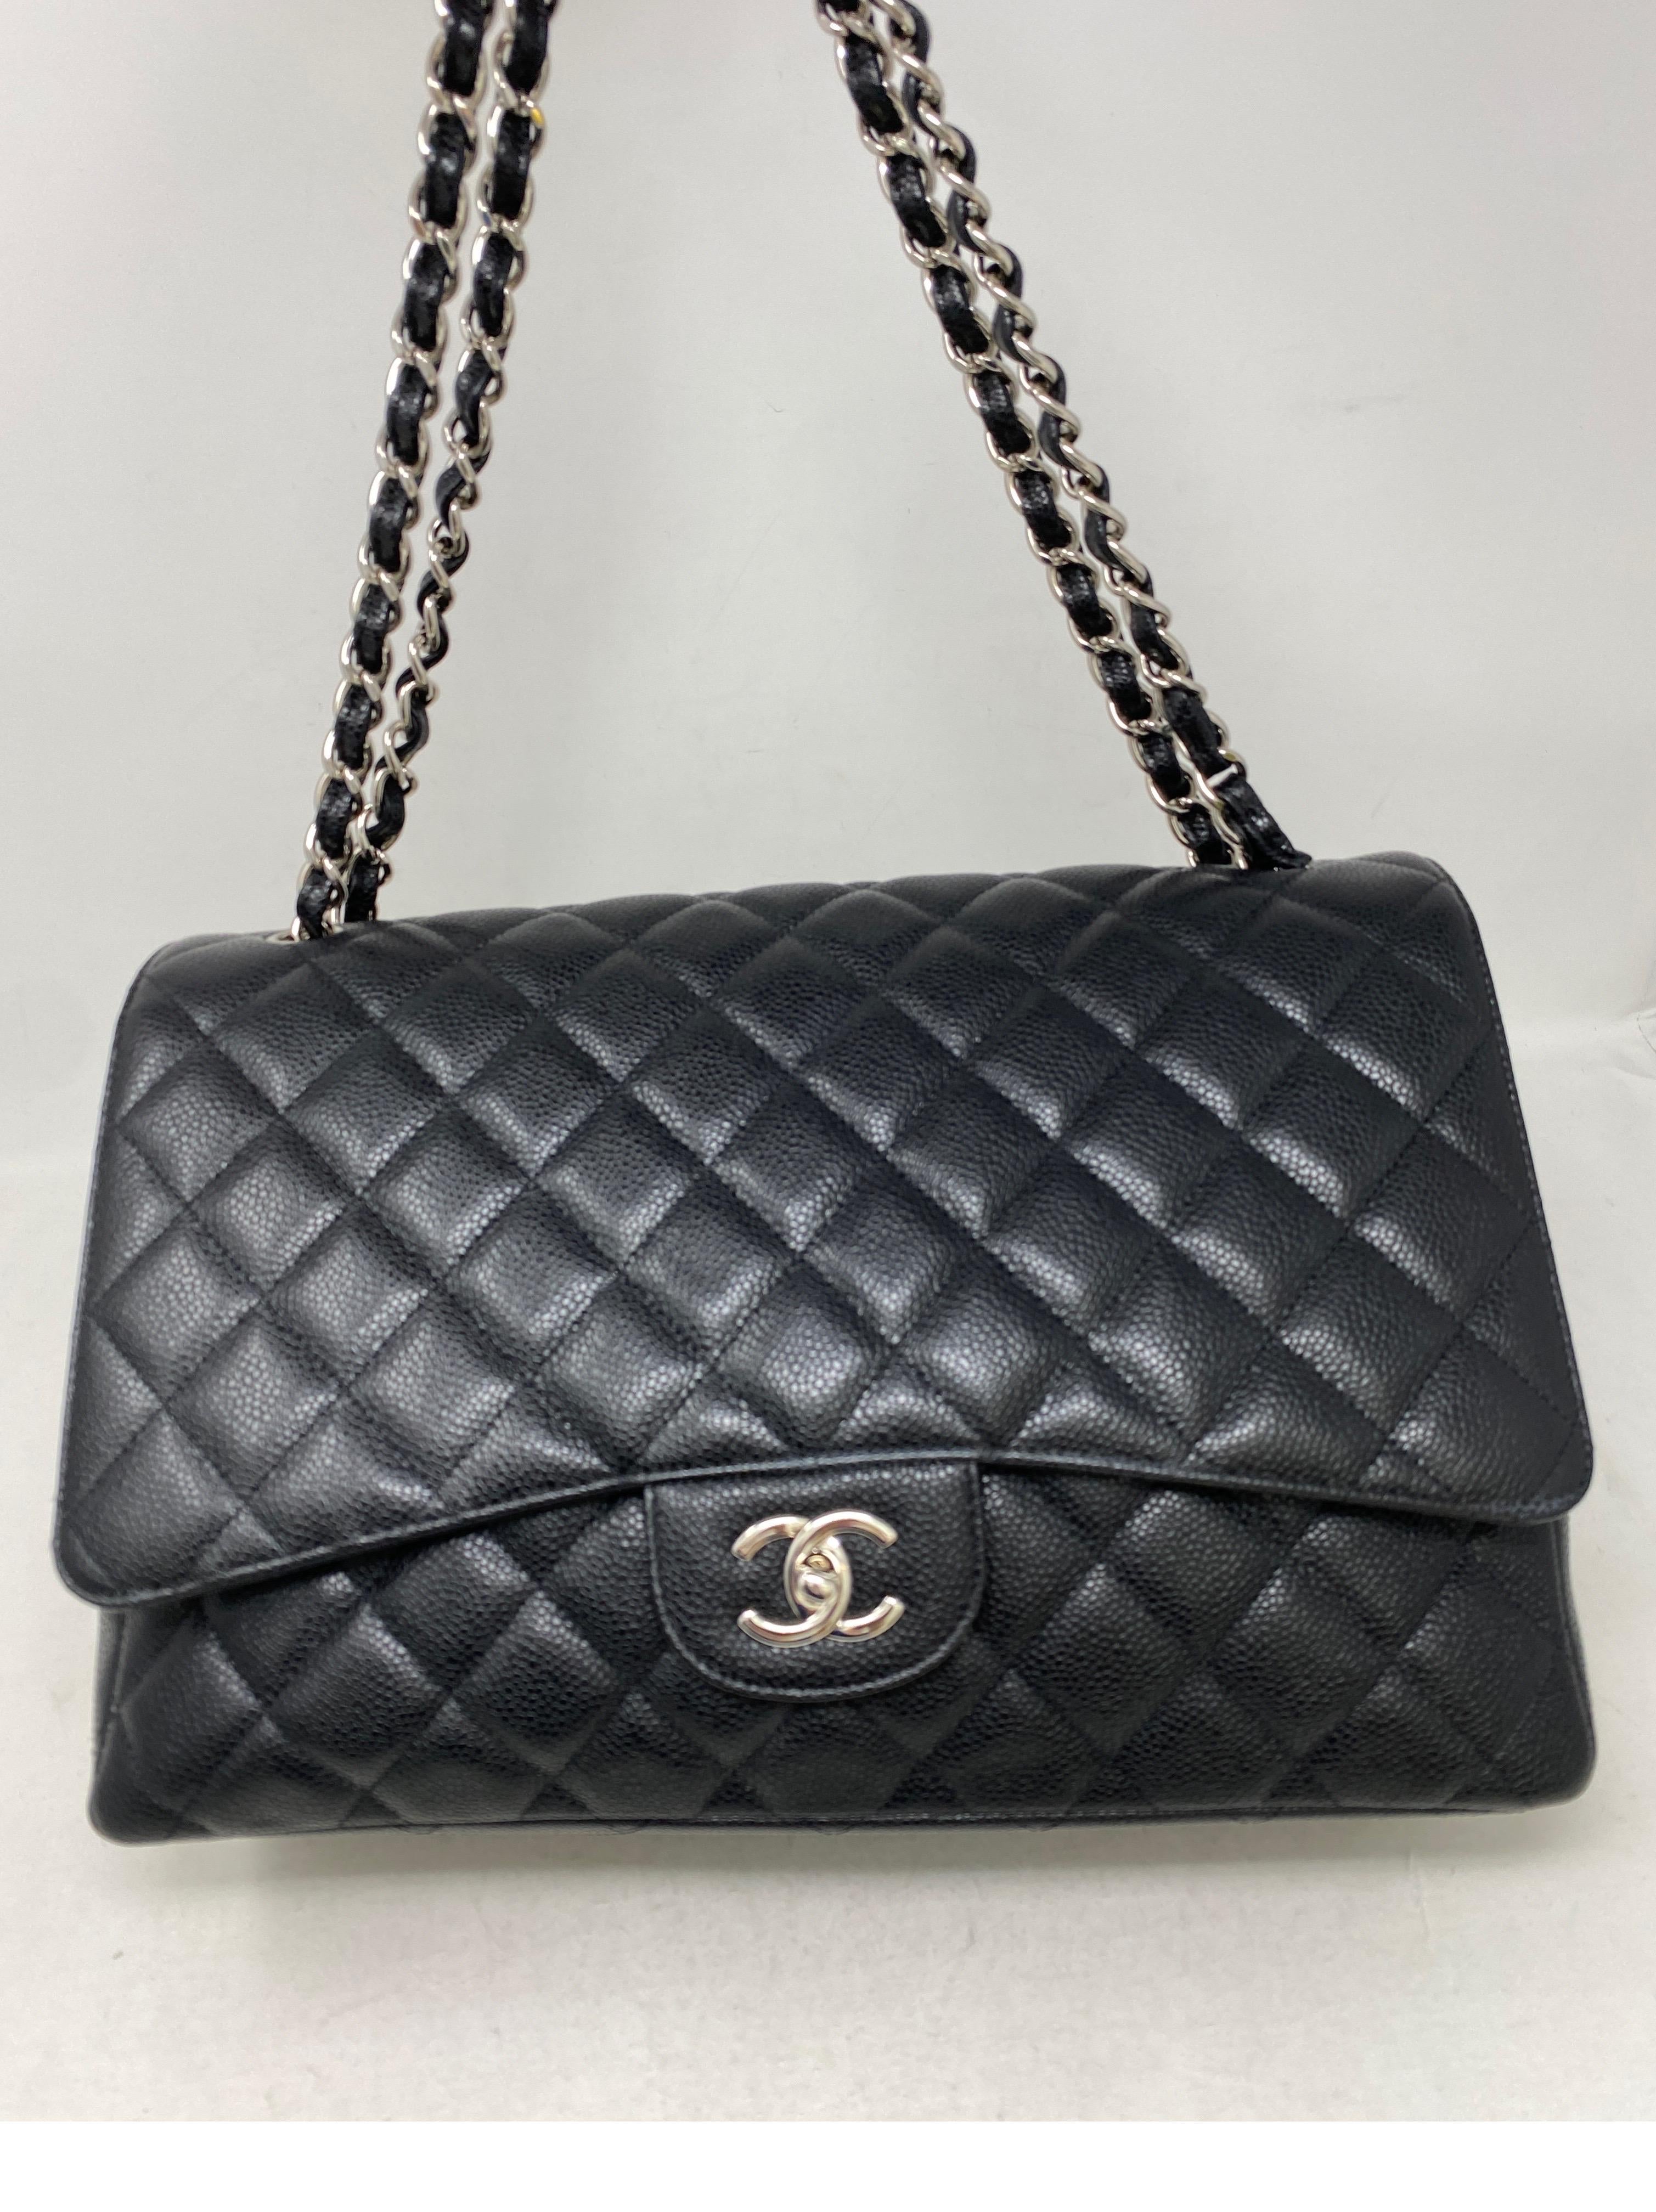 Chanel Black Maxi Single Flap Bag. Silver hardware. Caviar black leather. Most wanted Maxi size. Full set. Includes authenticity card and dust cover. Guaranteed authentic. 